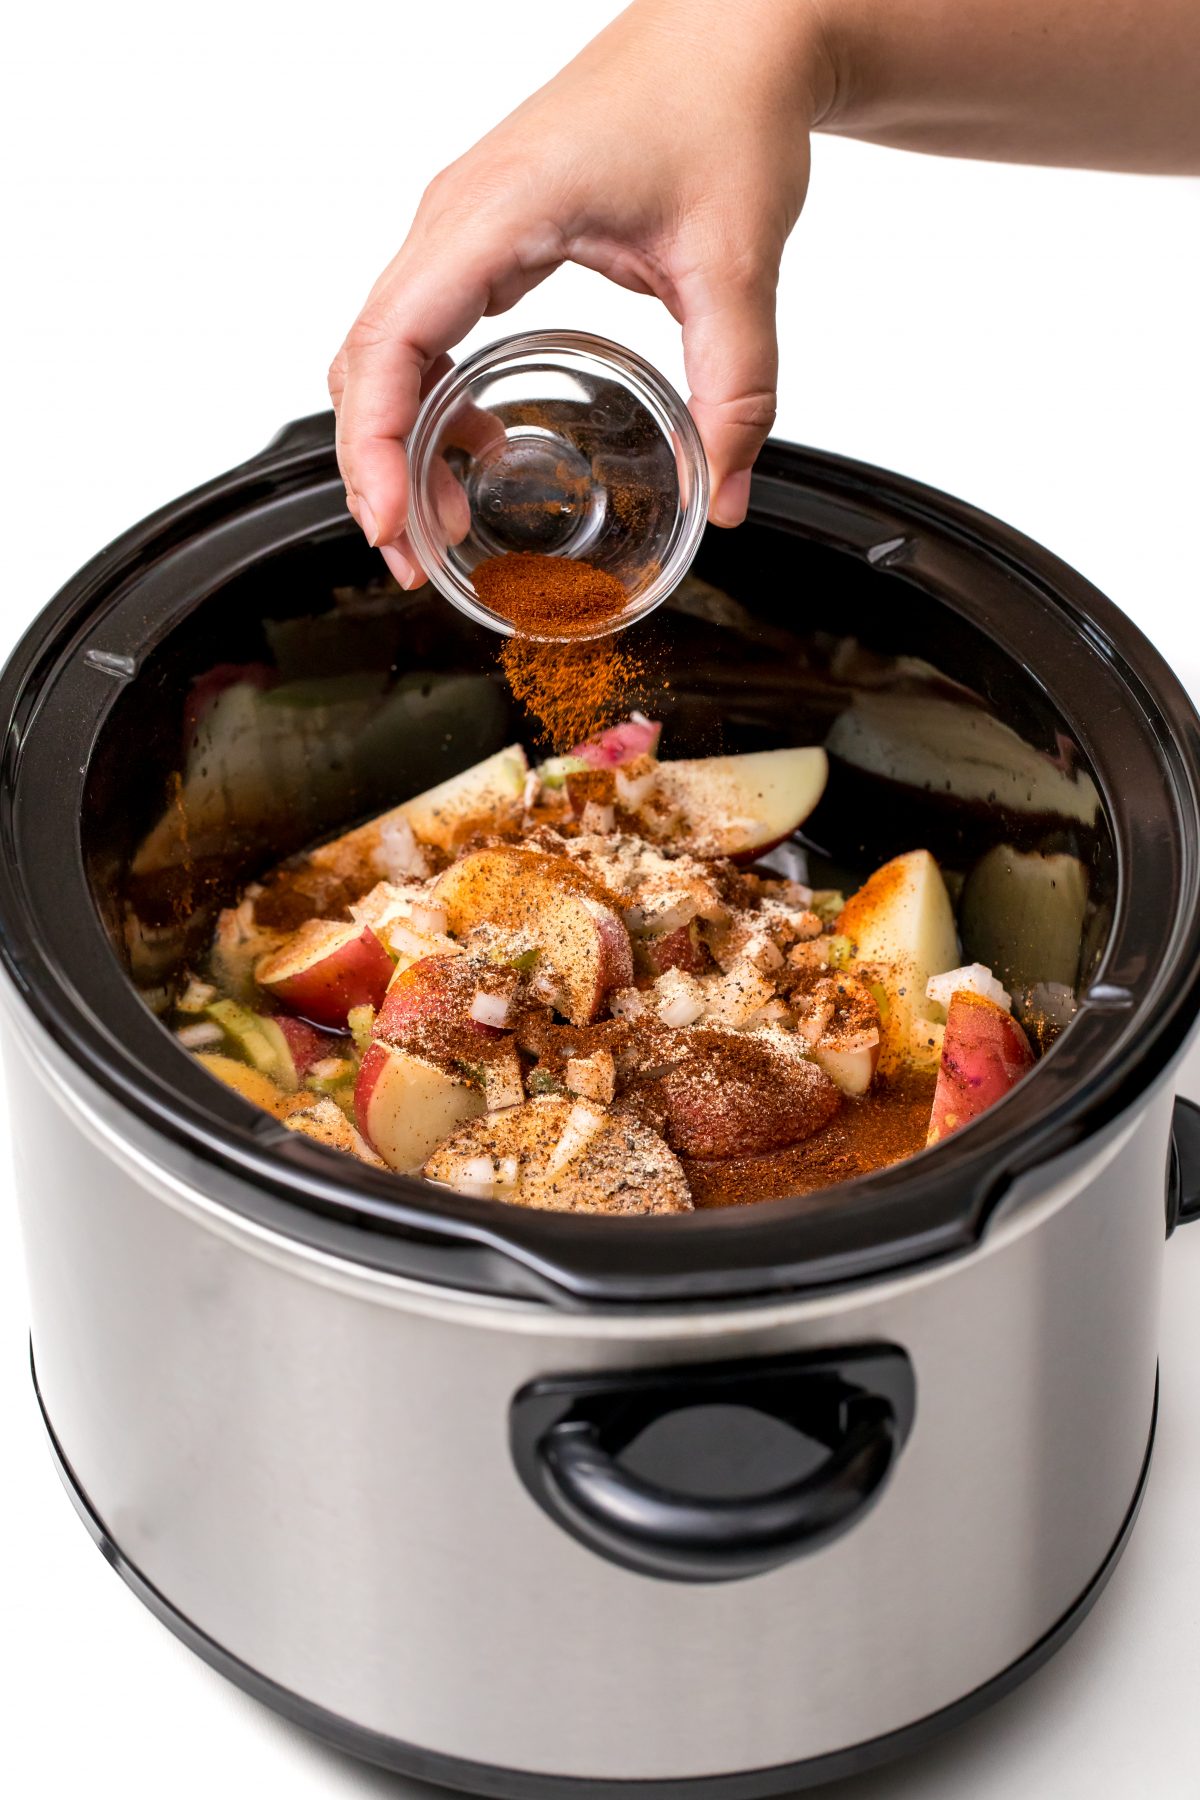 Place potatoes and spices in slow-cooker